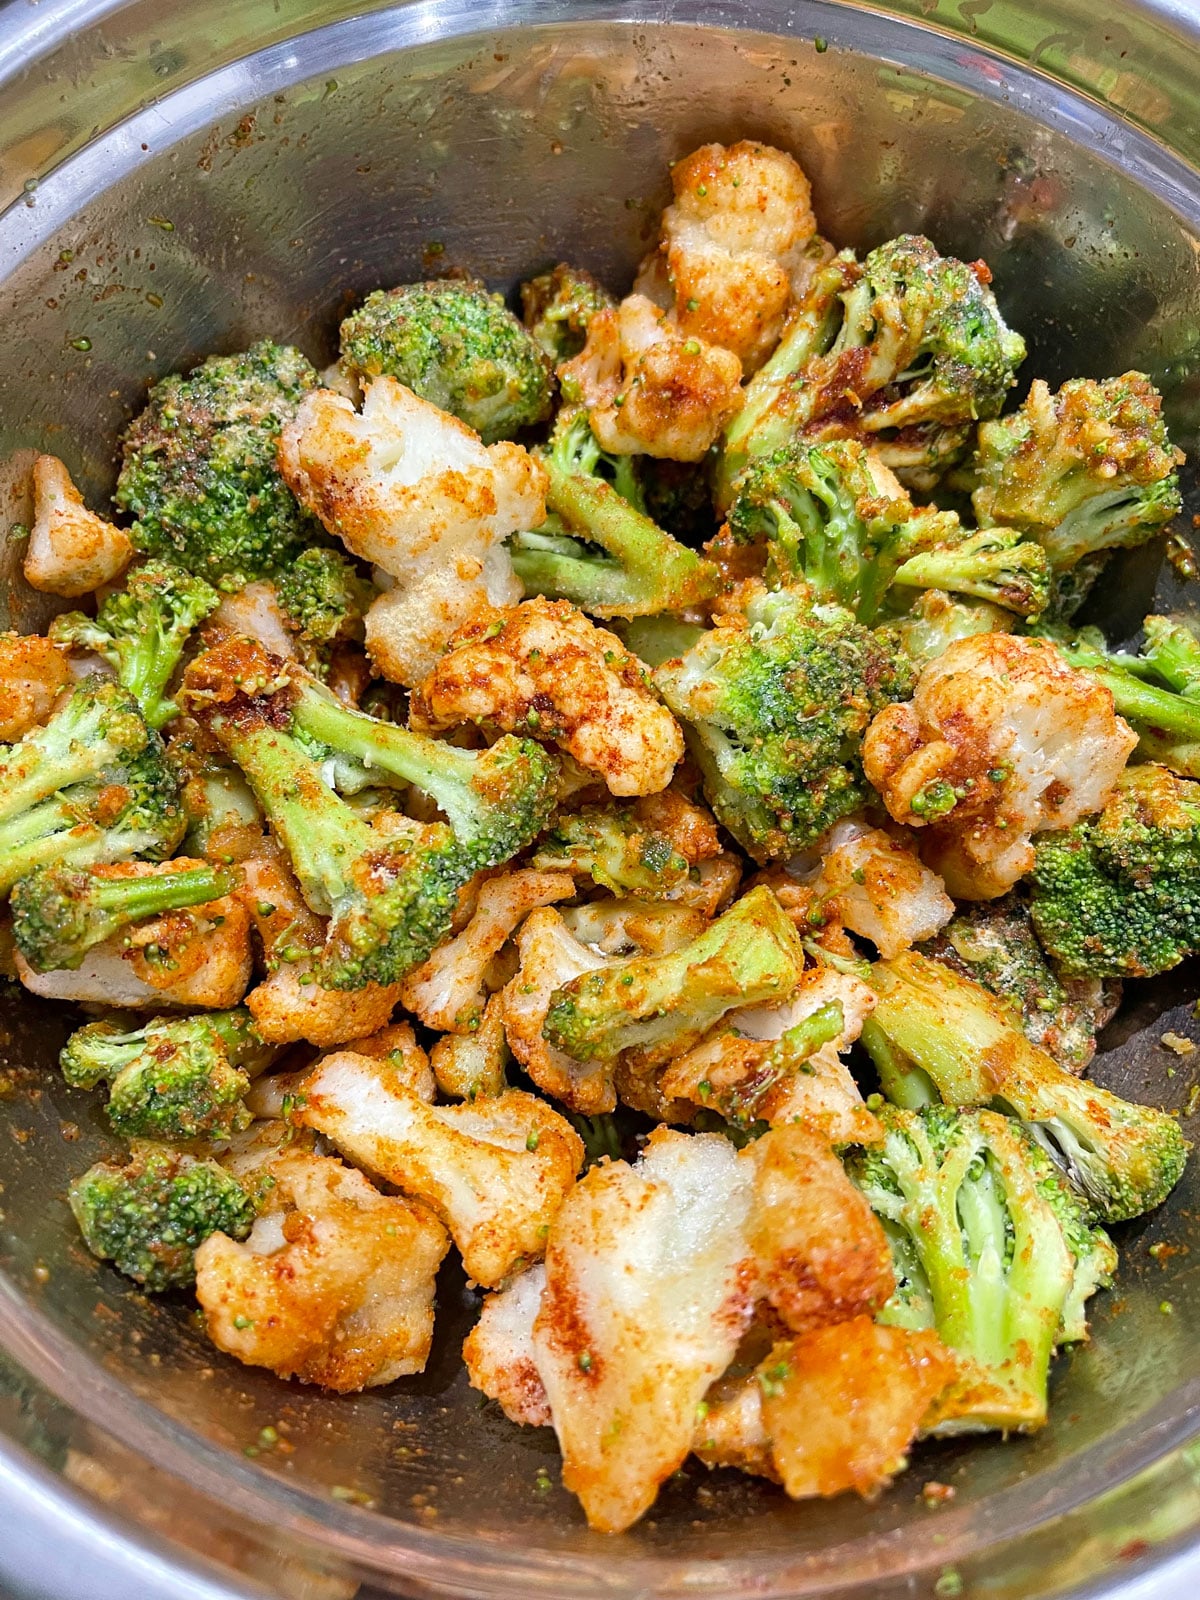 broccoli and cauliflower mixed with spices, balsamic vinegar and oil